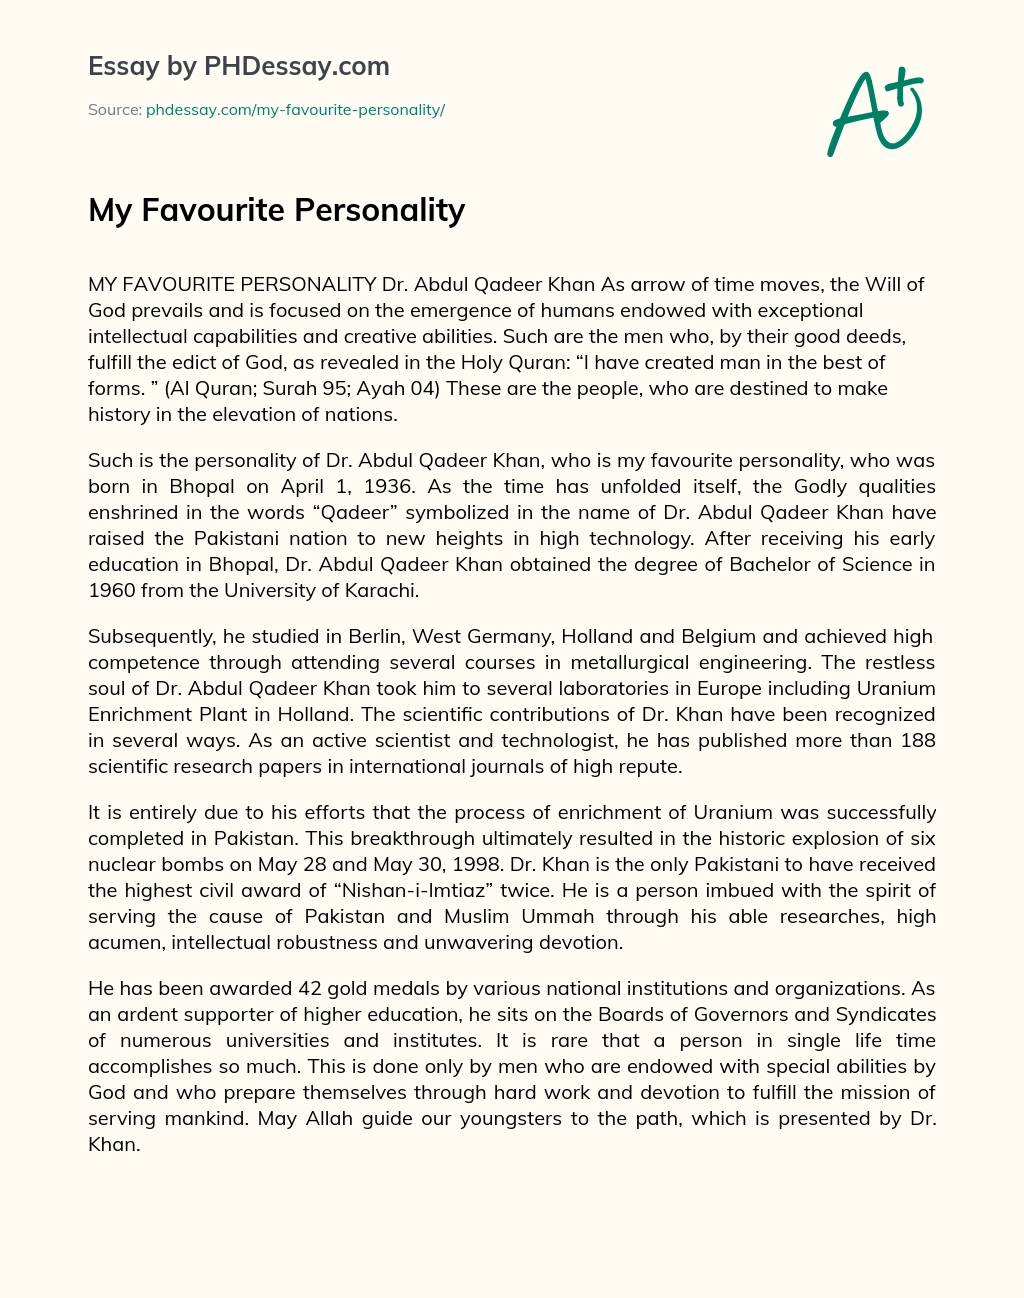 My Favourite Personality essay